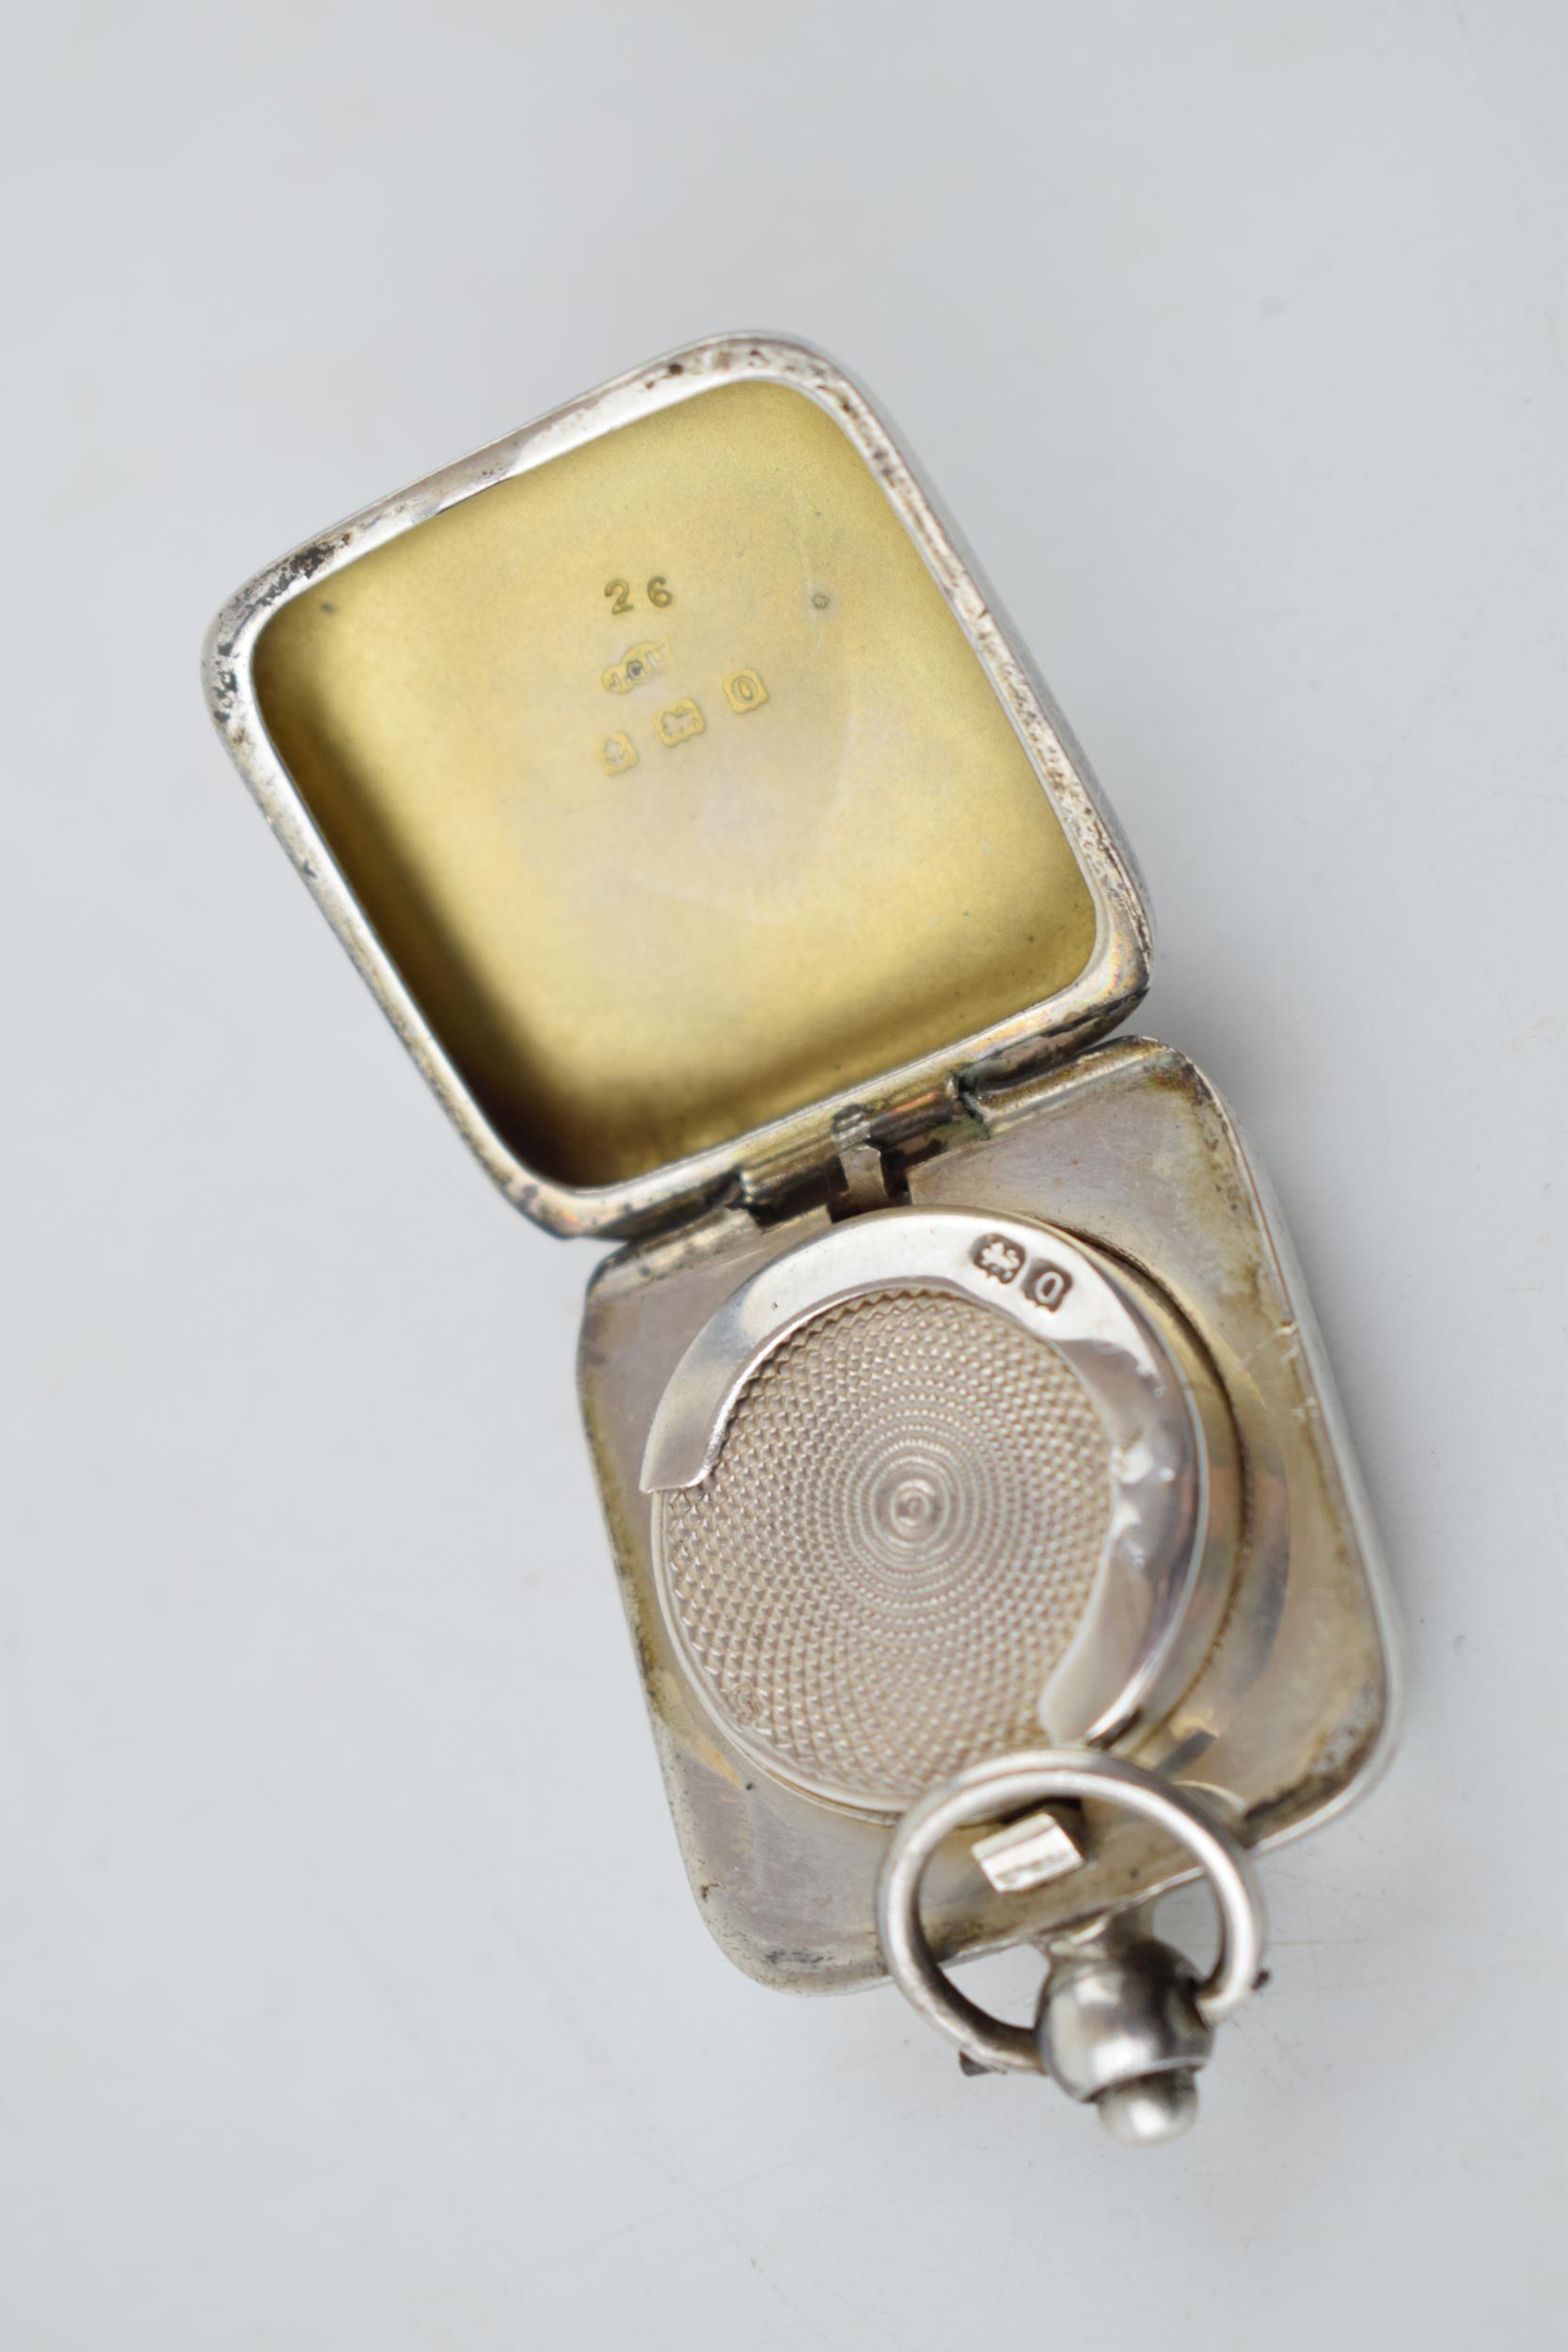 Silver sovereign case, Birmingham 1913, working action. - Image 3 of 3